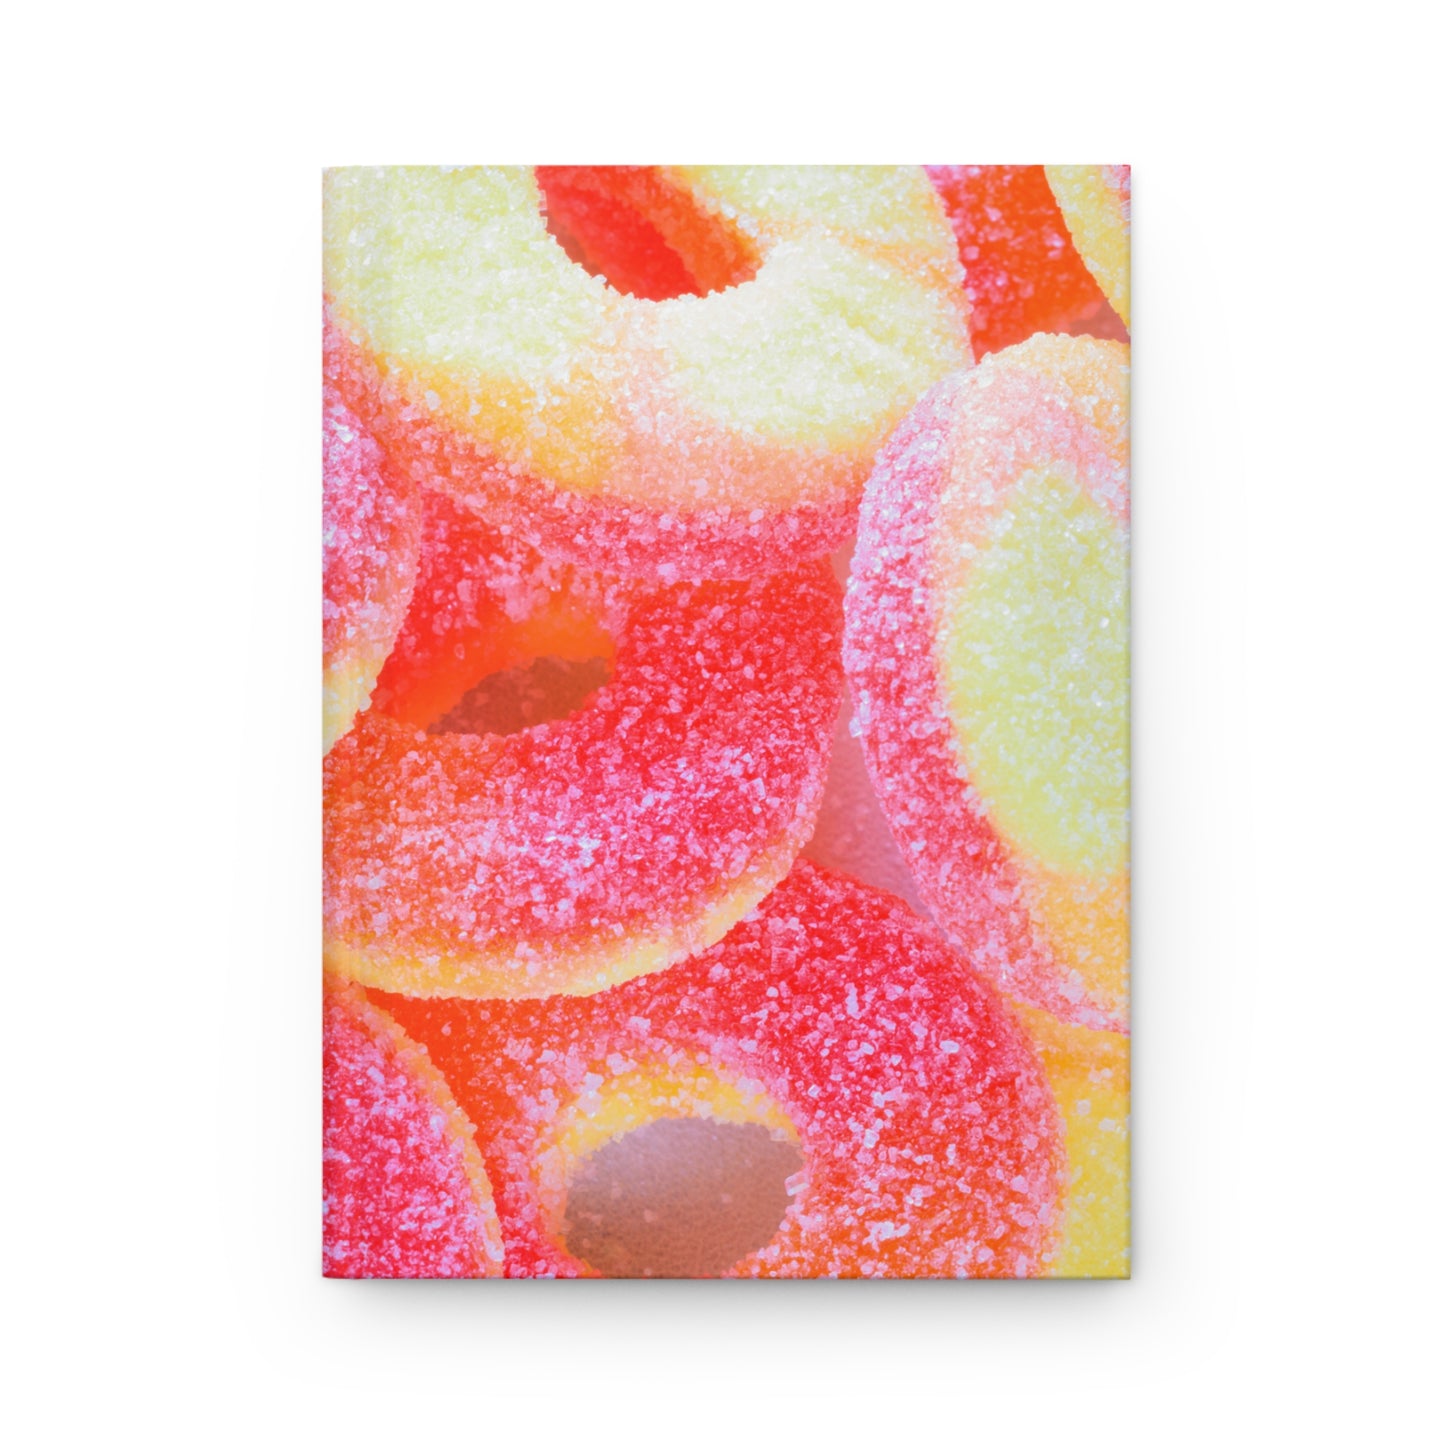 Peach Candy Rings Hardcover Matte Journal